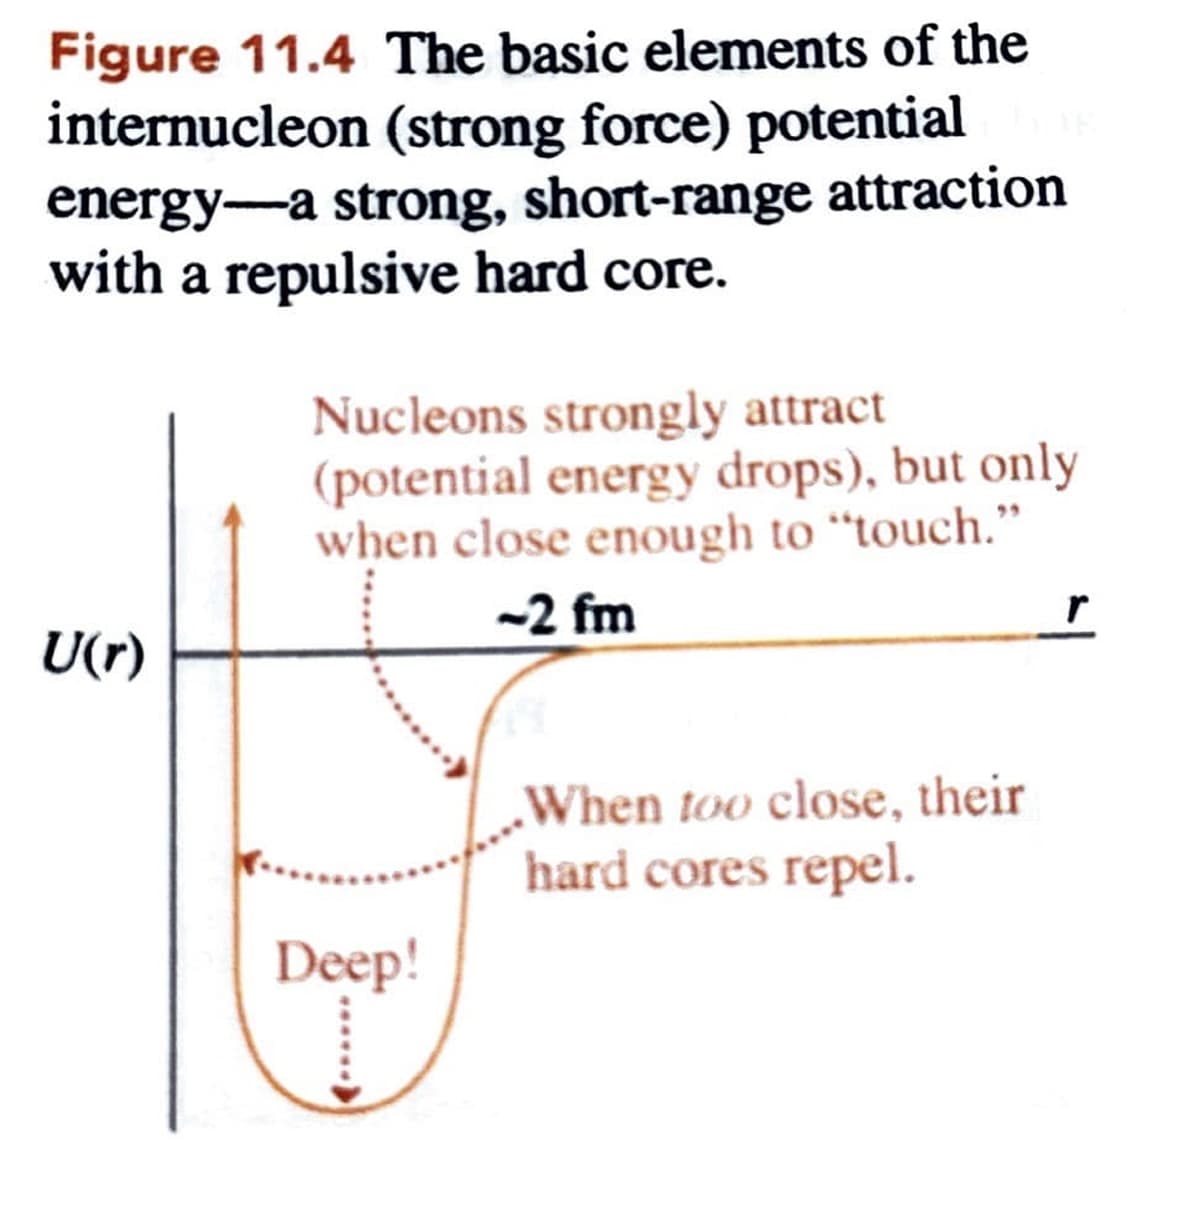 Figure 11.4 The basic elements of the
internucleon (strong force) potential
energy—a strong, short-range attraction
with a repulsive hard core.
Nucleons strongly attract
(potential energy drops), but only
when close enough to "touch."
-2 fm
U(r)
Deep!
When too close, their
hard cores repel.